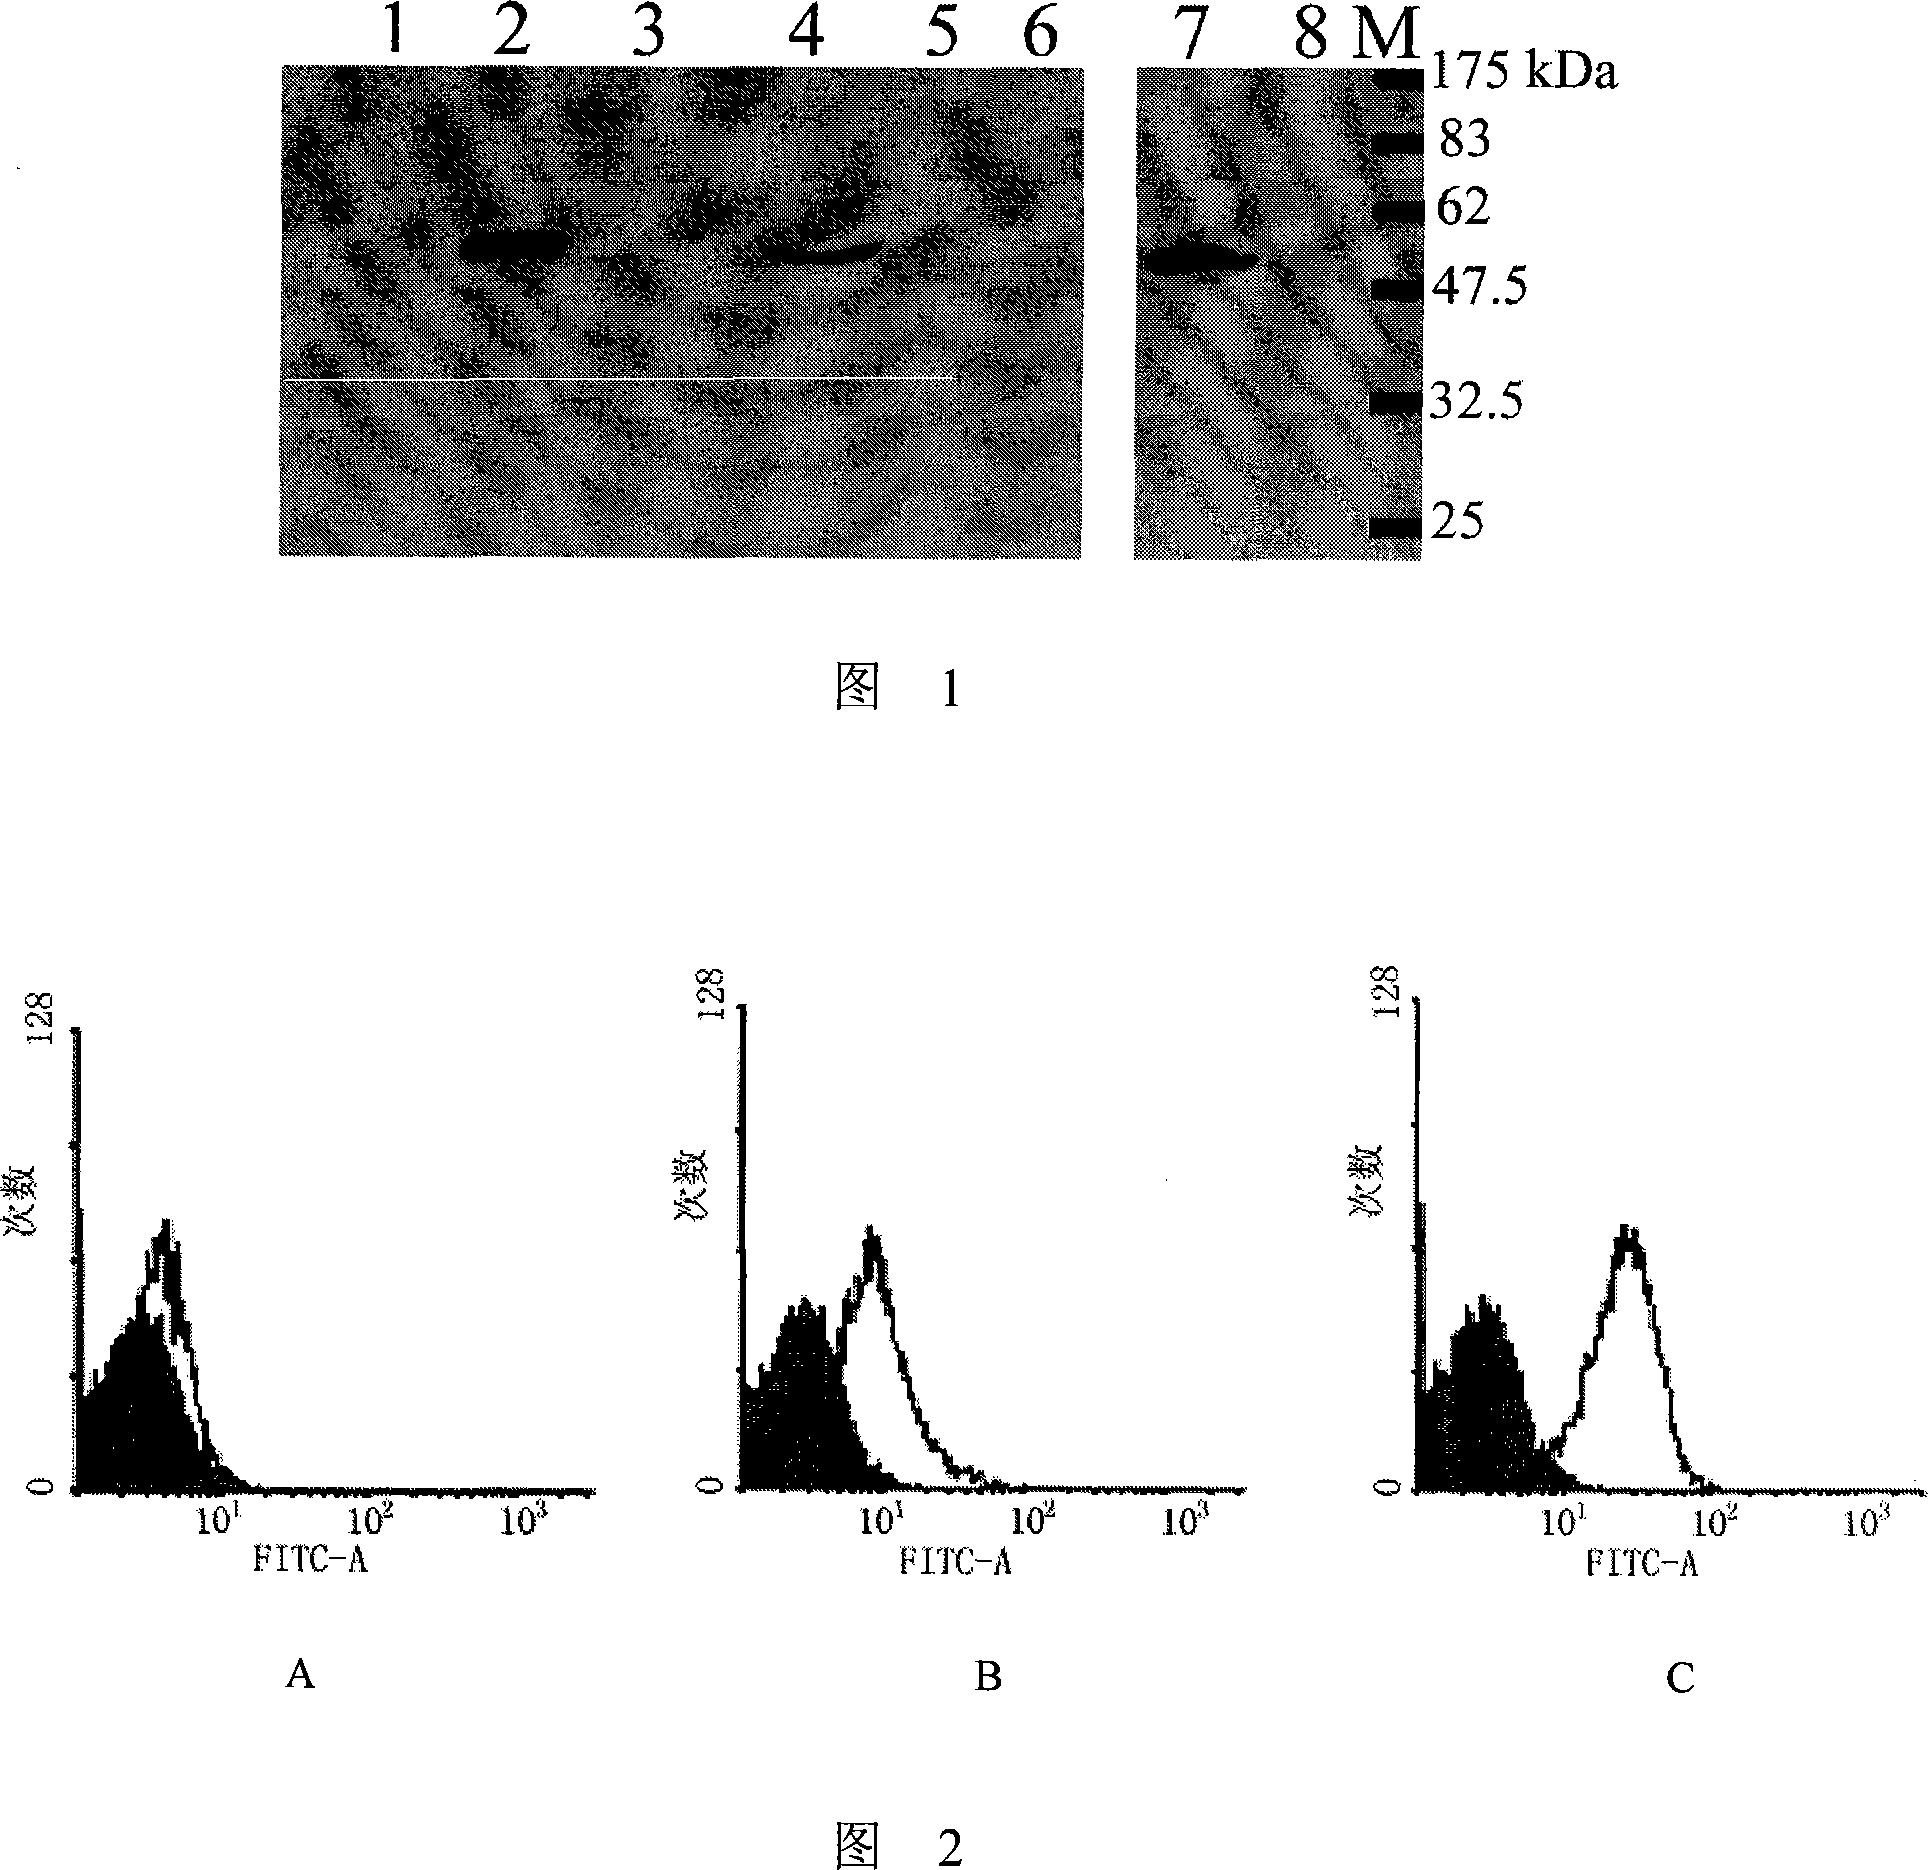 Monoclonal antibody of membrane protein E for resisting West Nile virus and application thereof